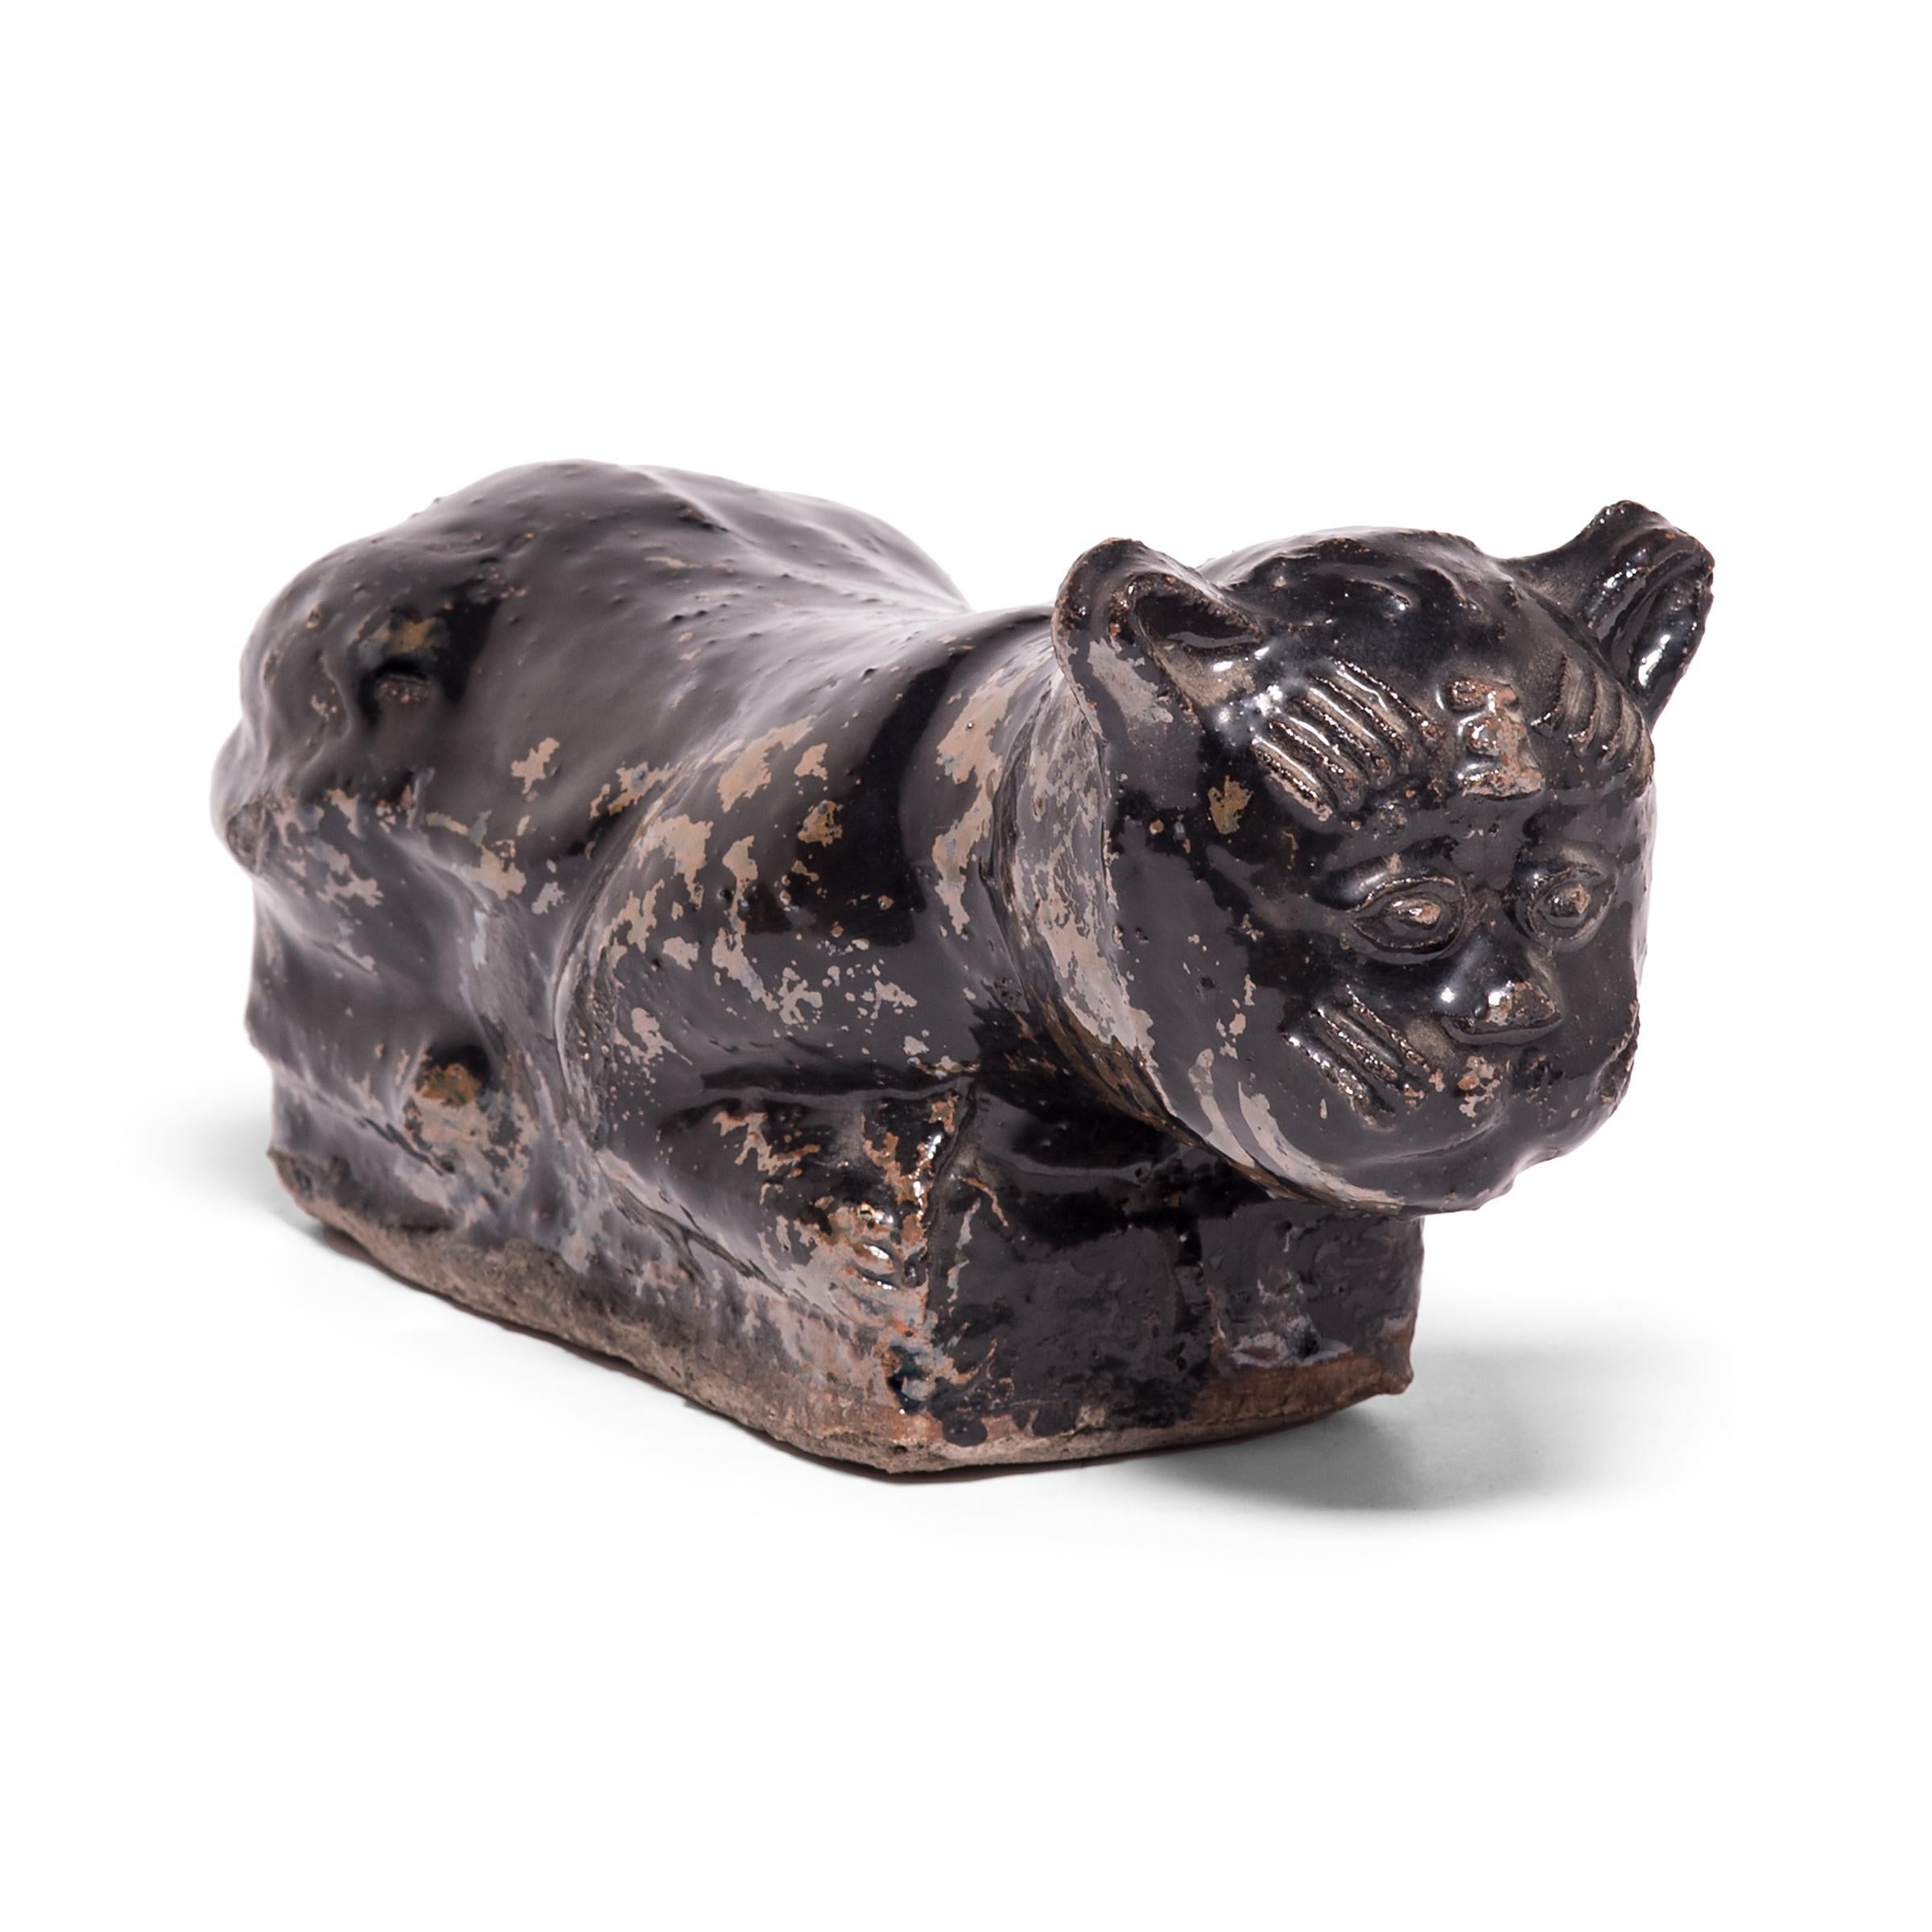 To keep her elaborate hairstyle intact while sleeping, a well-to-do Qing-dynasty woman once used this ceramic headrest as a pillow. The headrest is shaped as a crouching house cat, cloaked in a beautifully irregular dark brown glaze. Drawn upon its